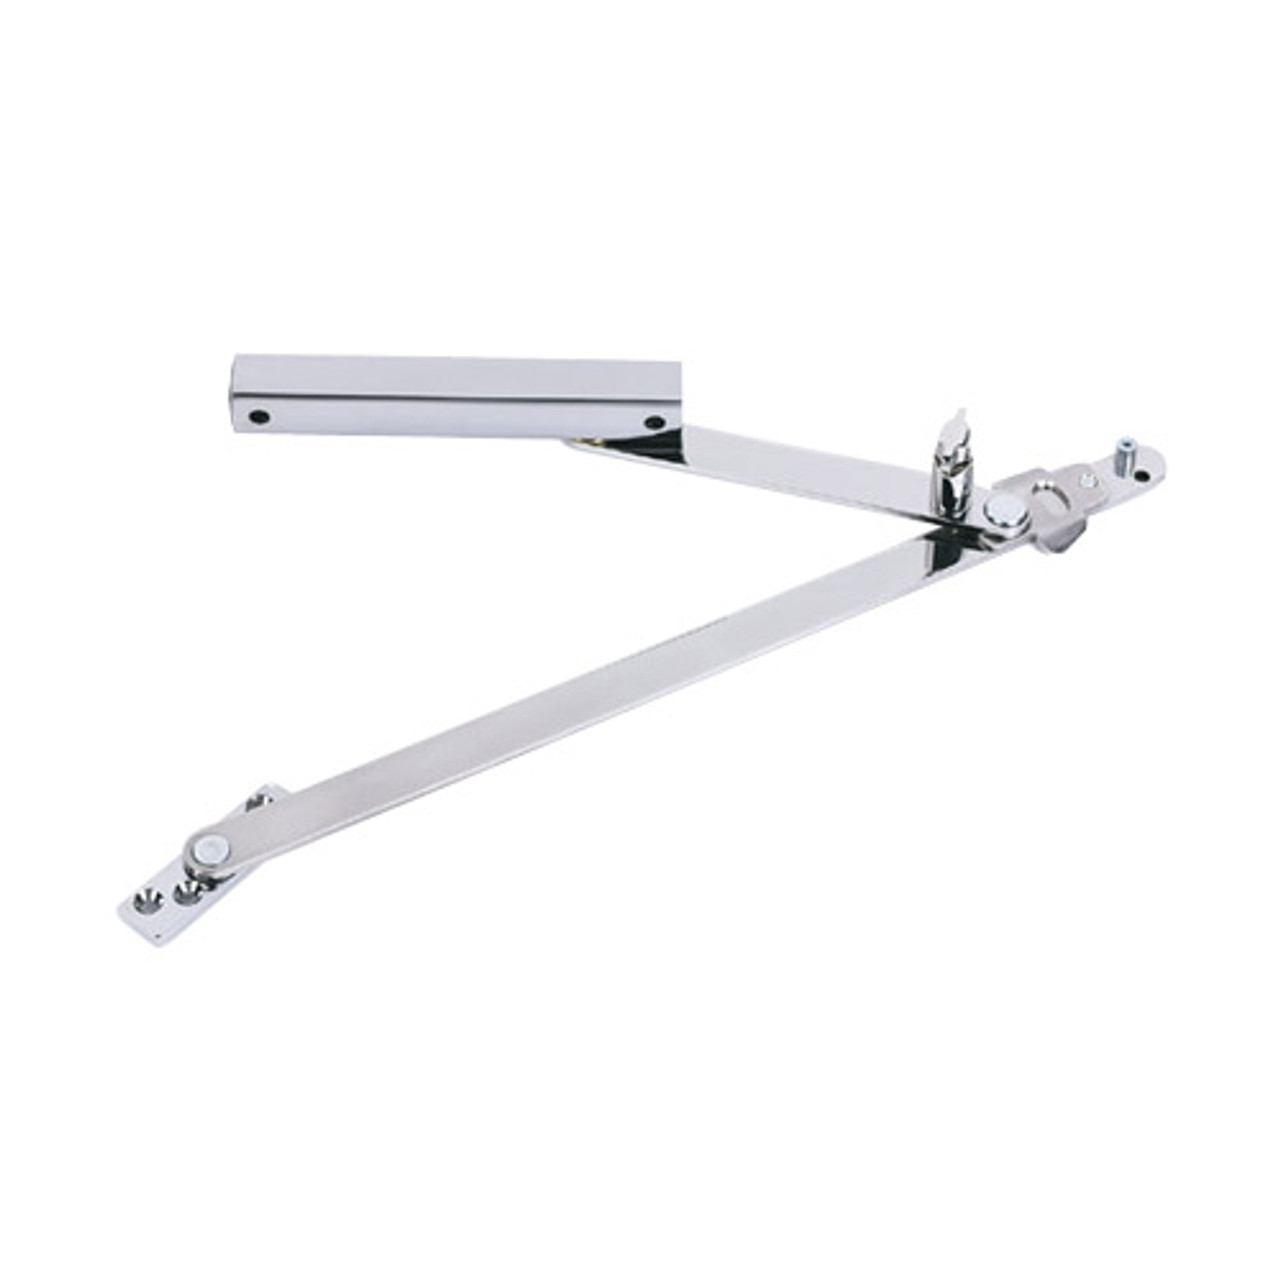 816H-US32-SHIM-2 Glynn Johnson 81 Series Heavy Duty Surface Overhead in Bright Stainless Steel